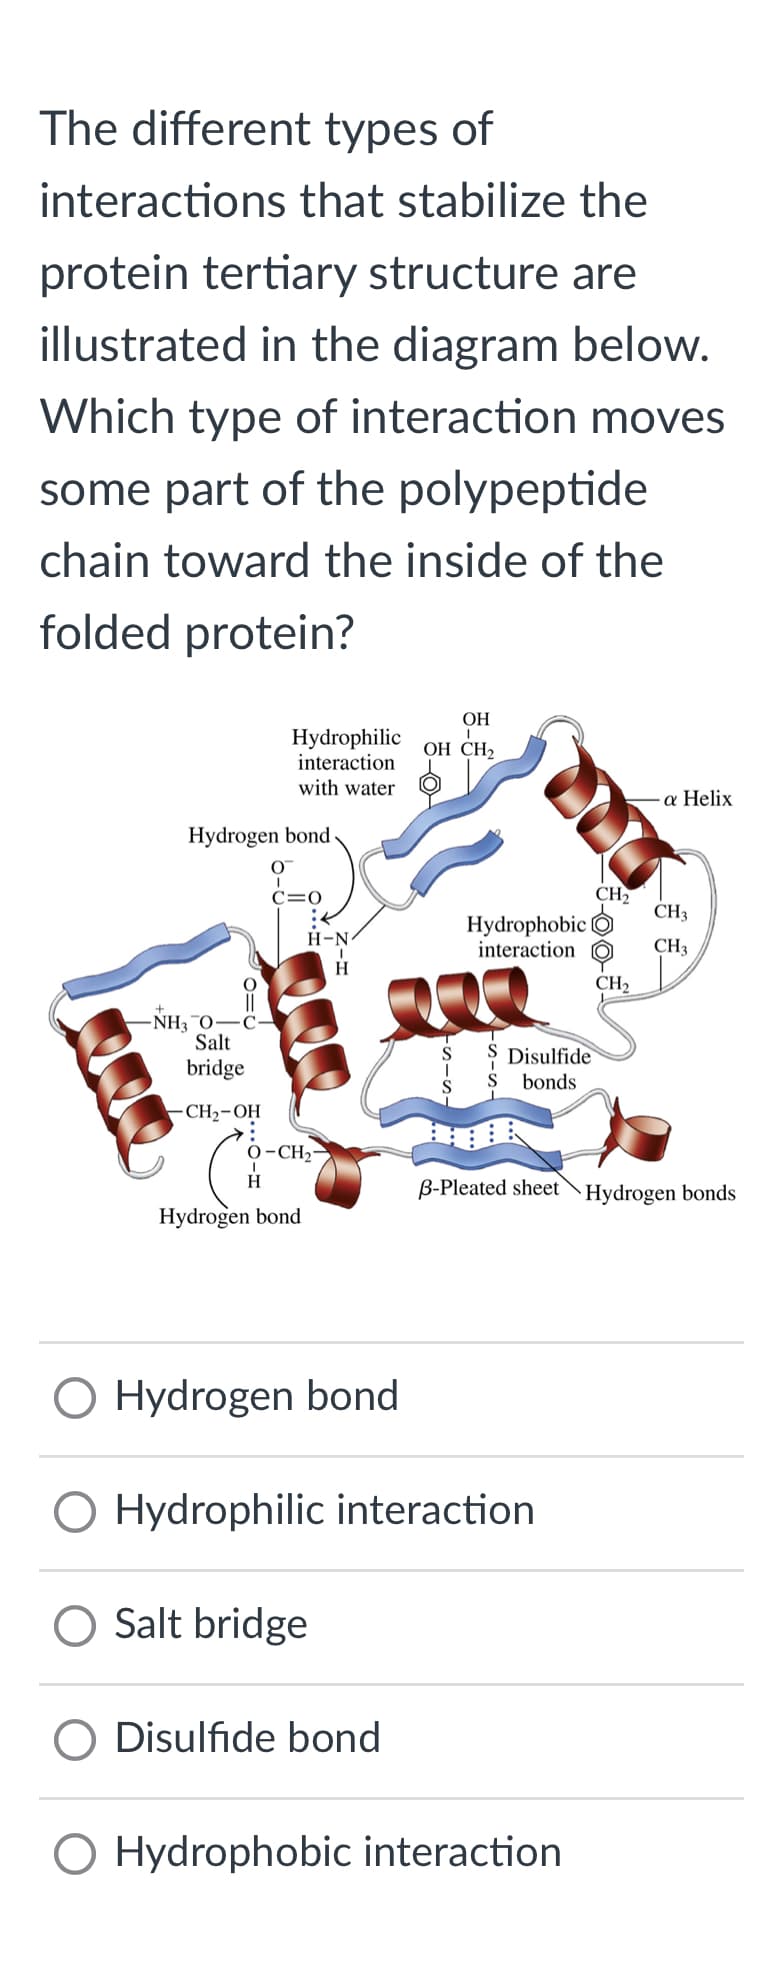 The different types of
interactions that stabilize the
protein tertiary structure are
illustrated in the diagram below.
Which type of interaction moves
some part of the polypeptide
chain toward the inside of the
folded protein?
OH
Hydrophilic OH CH₂
interaction
with water
Hydrogen bond
-NH₂3-0- C
Salt
bridge
-CH₂-OH
C=0
H-N
H
0-CH,-
I
H
Hydrogen bond
Salt bridge
O Disulfide bond
222
-SIS
Hydrophobic
interaction
200
O Hydrogen bond
O Hydrophilic interaction
Disulfide
bonds
B-Pleated sheet
O Hydrophobic interaction
CH₂
CH₂
a Helix
CH3
CH3
Hydrogen bonds